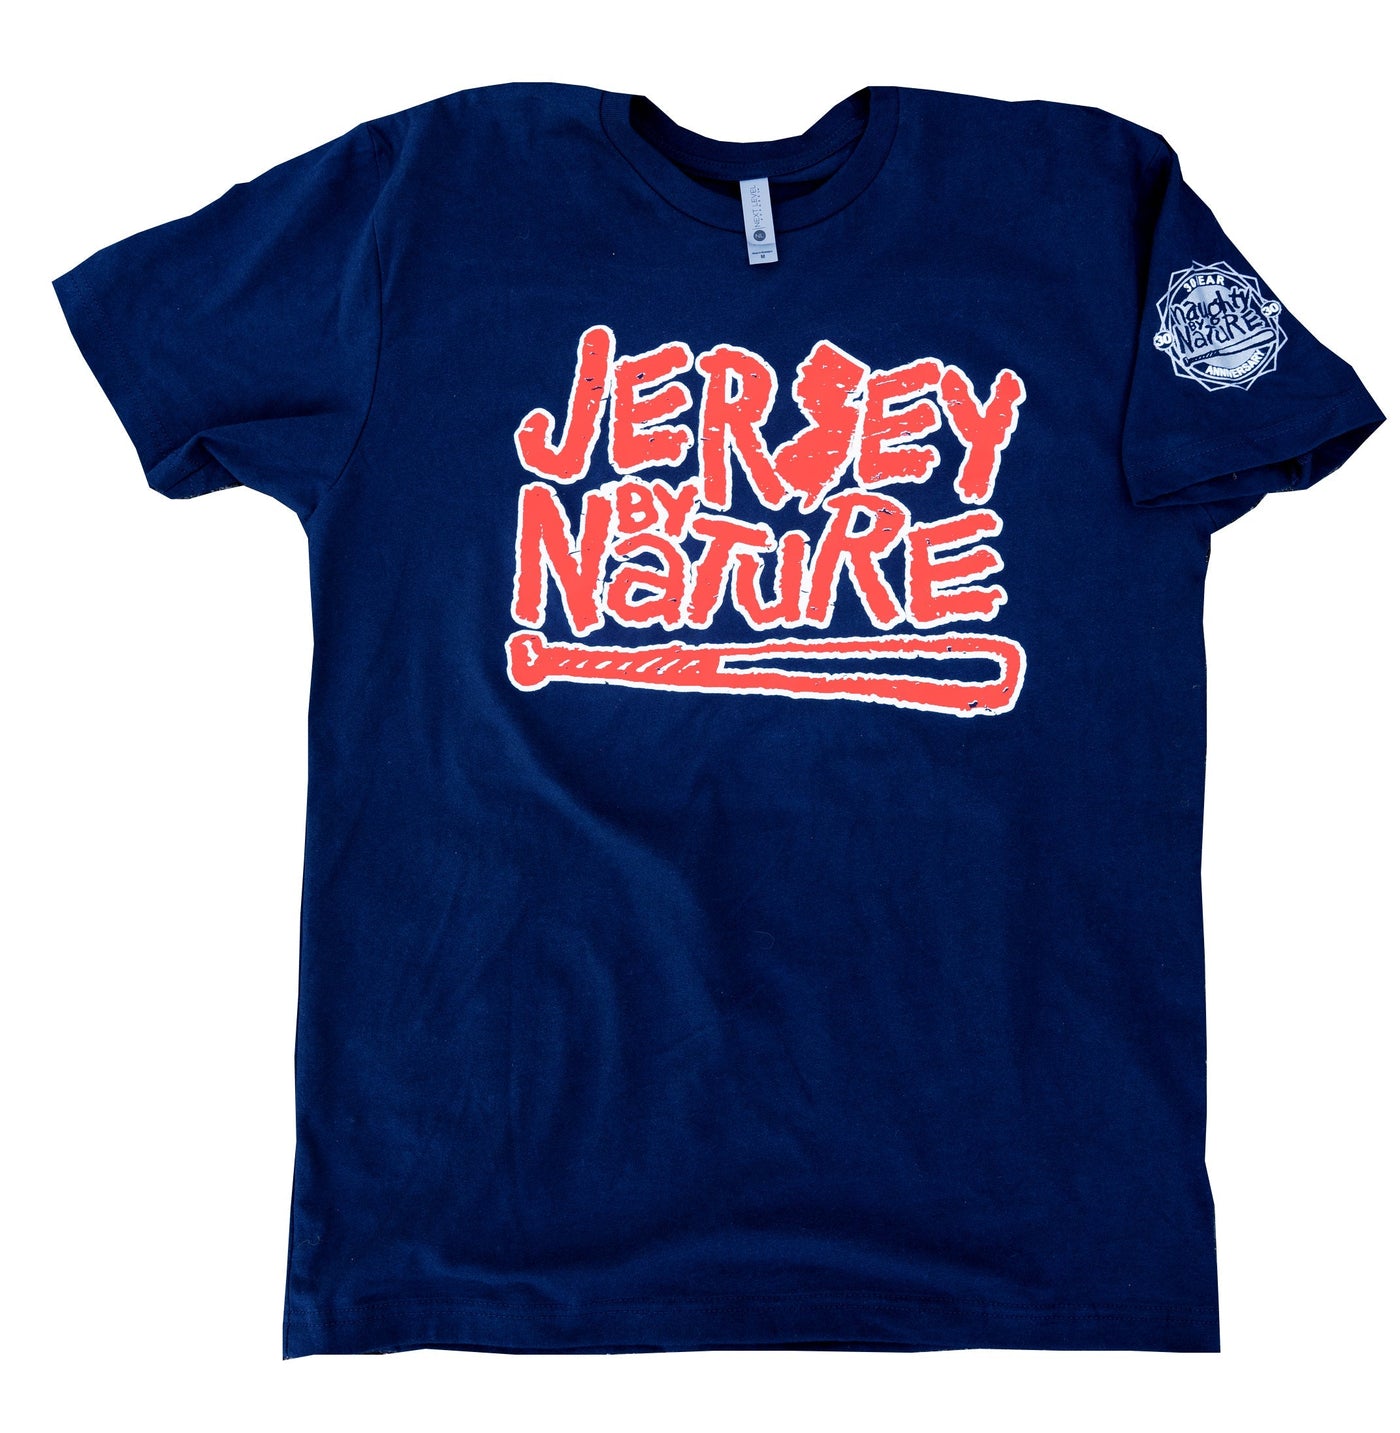 Jersey By Nature Royal Blue Tee